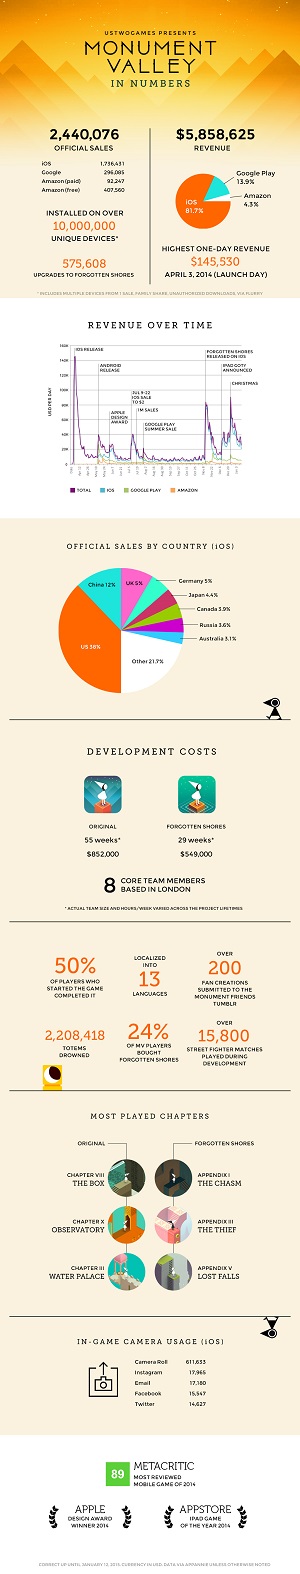 The Monument Valley infographic